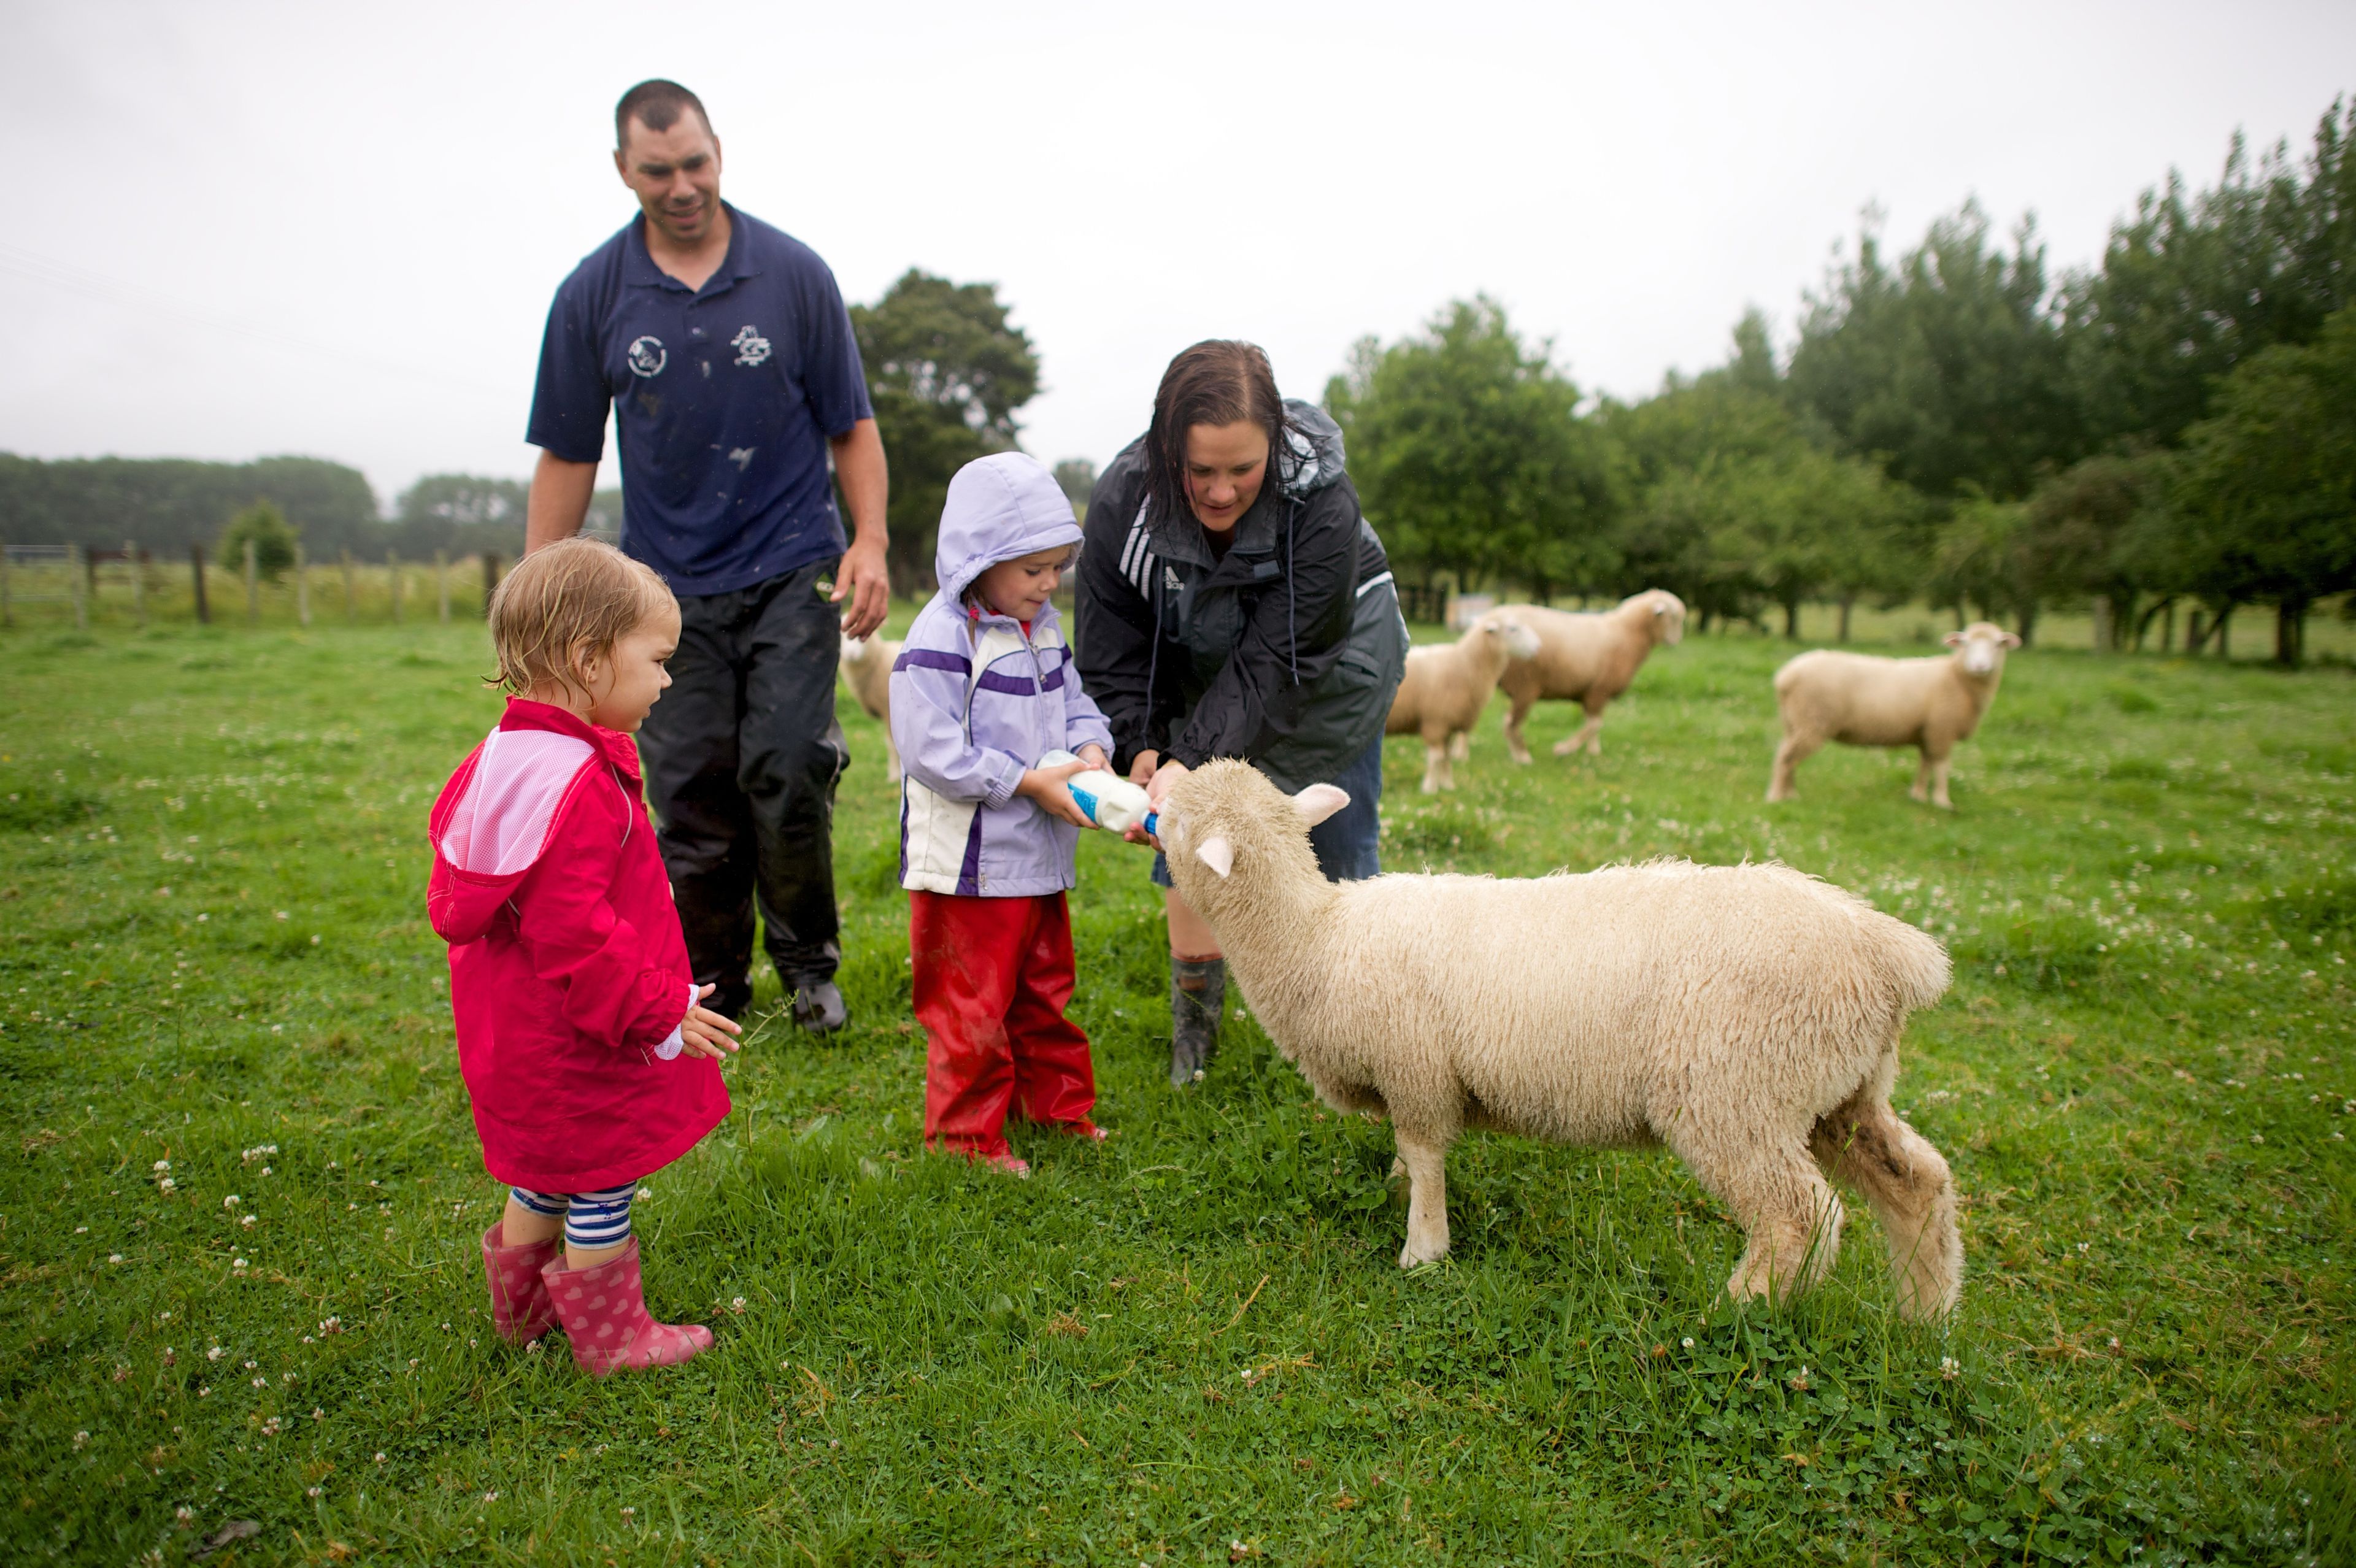 A mother and father in New Zealand show their children how to feed sheep.